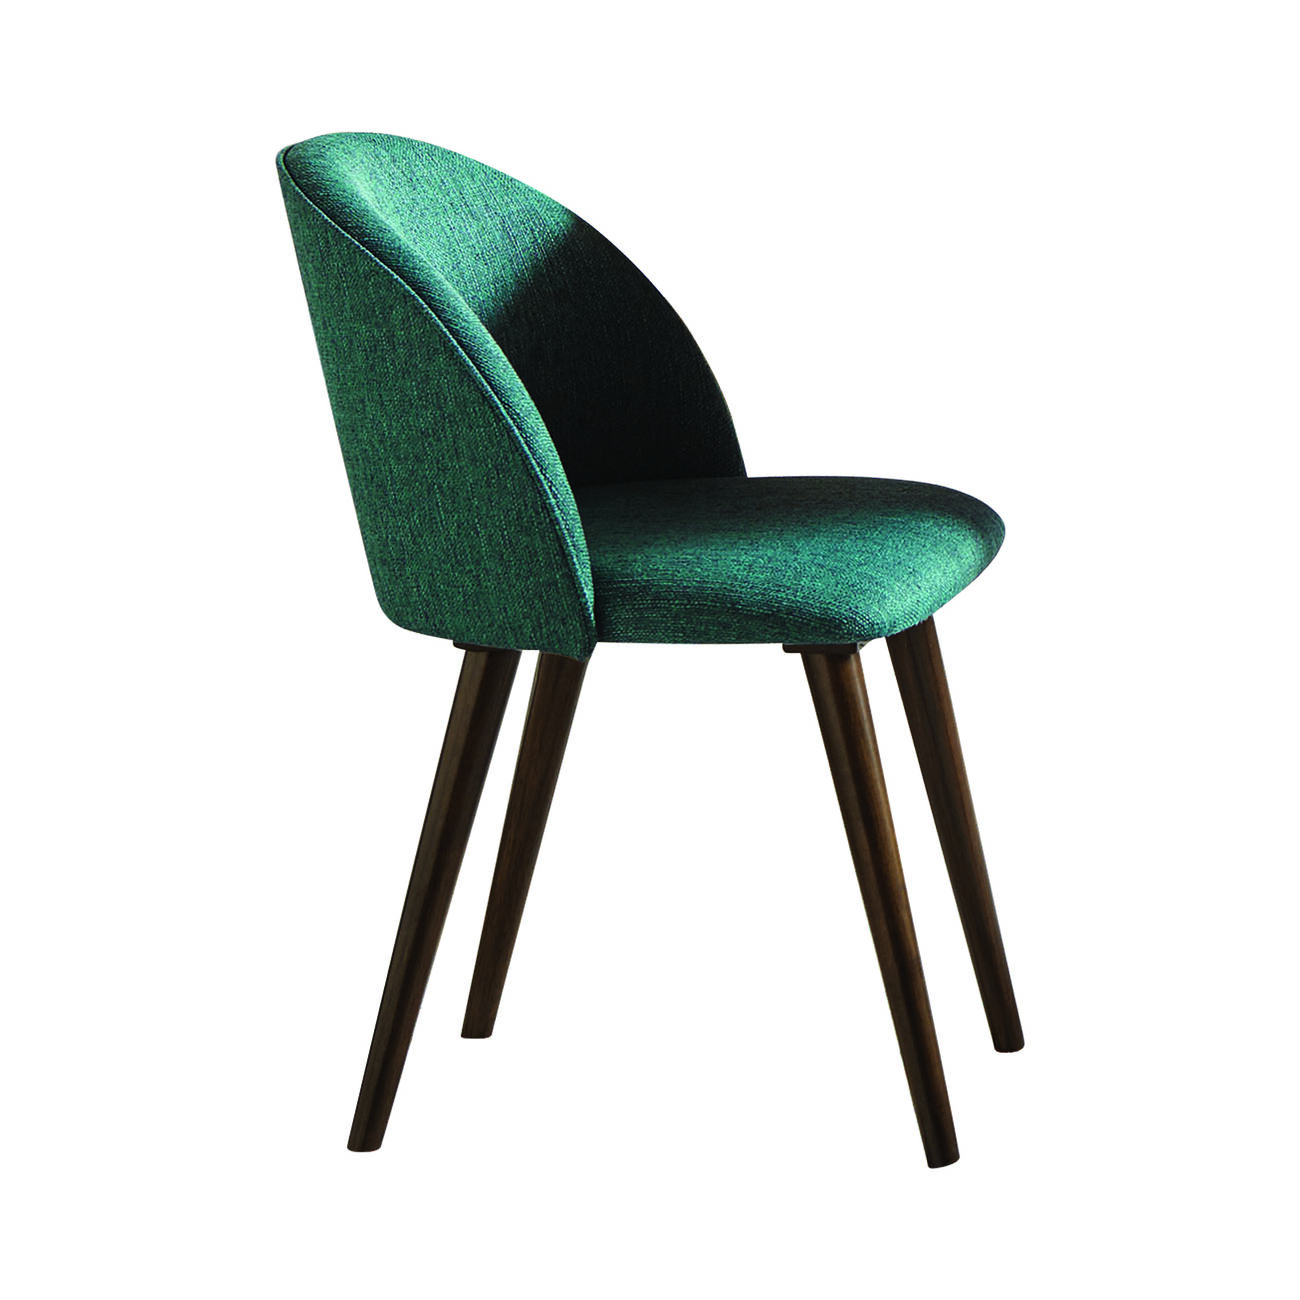 Wooden Dining Chairs with Fabric Upholstered Seat and Back, Aqua Green and Brown, Set of Two